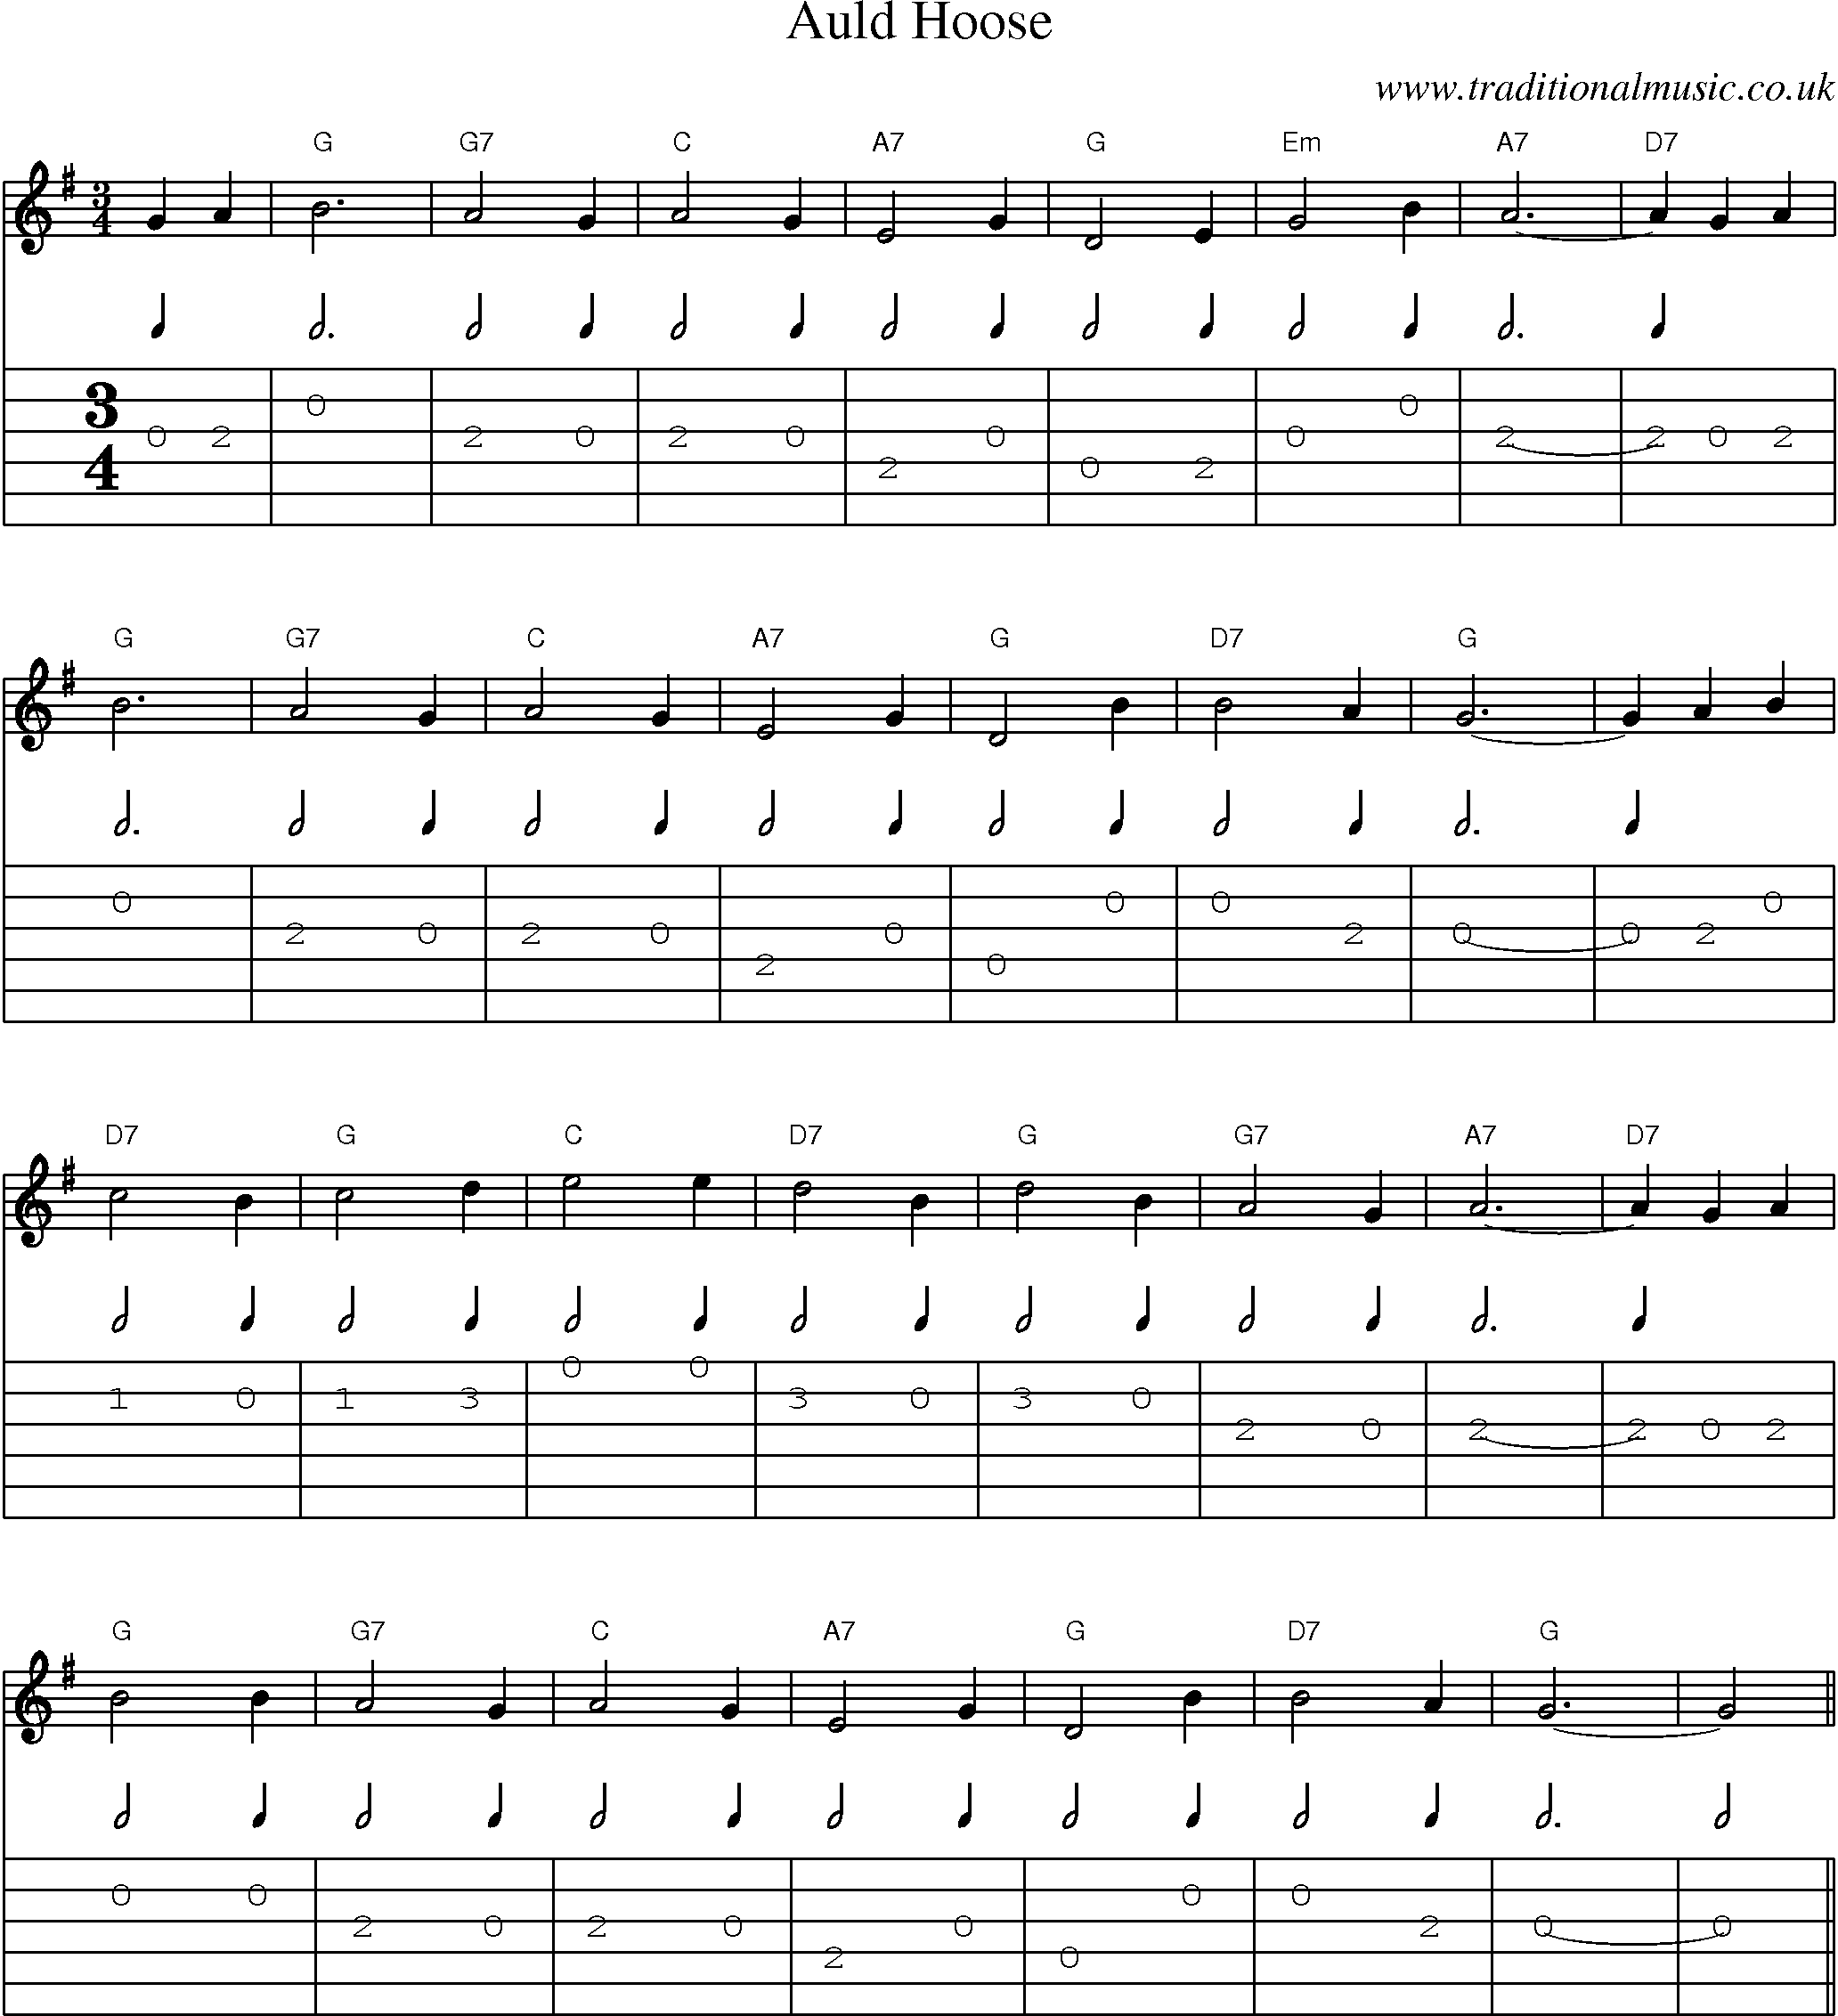 Music Score and Guitar Tabs for Auld Hoose